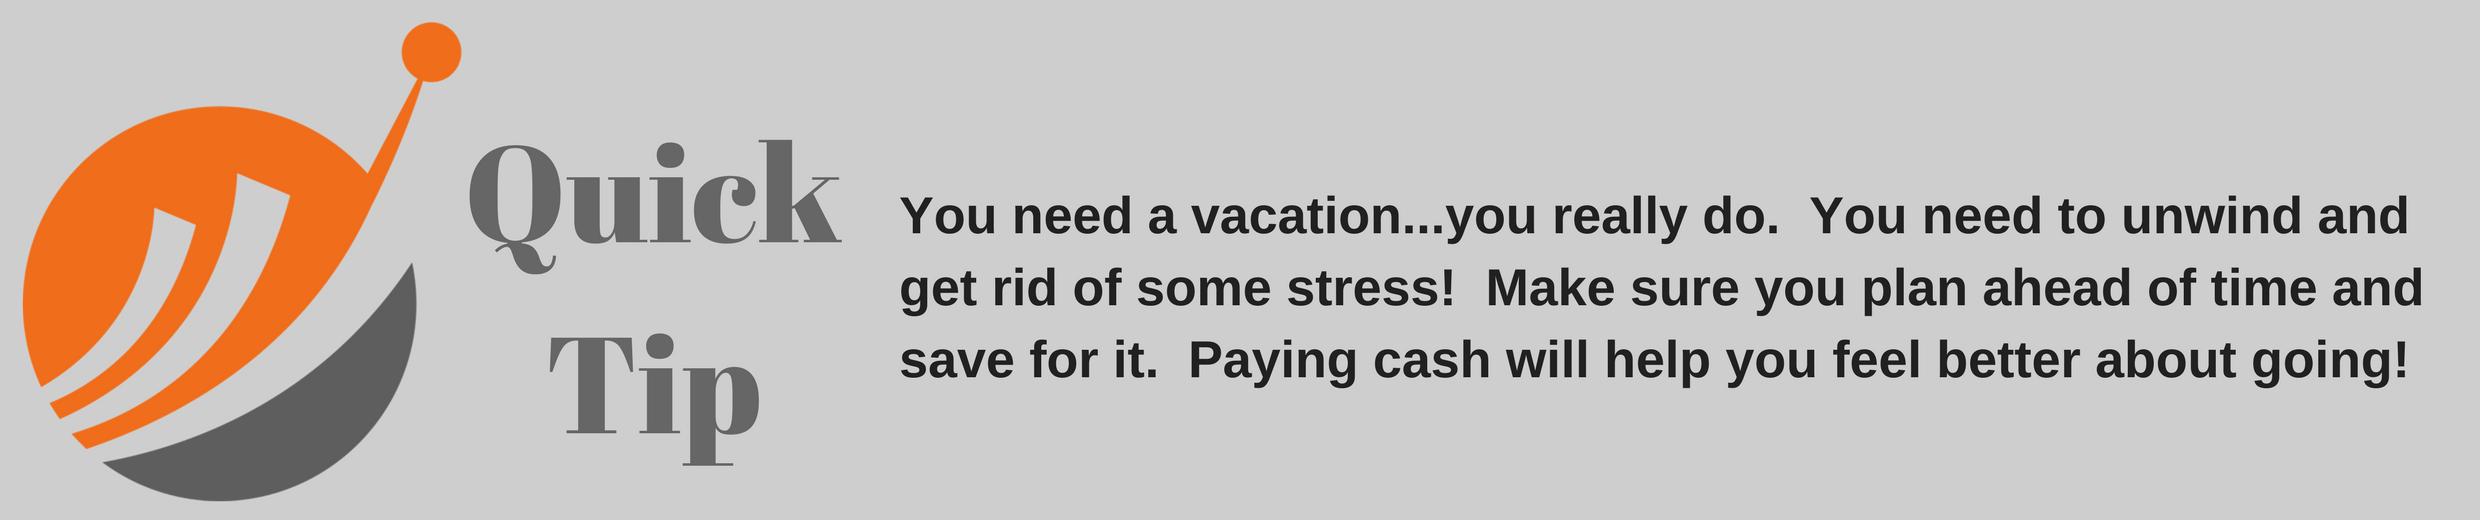 Quick Tip - Vacation